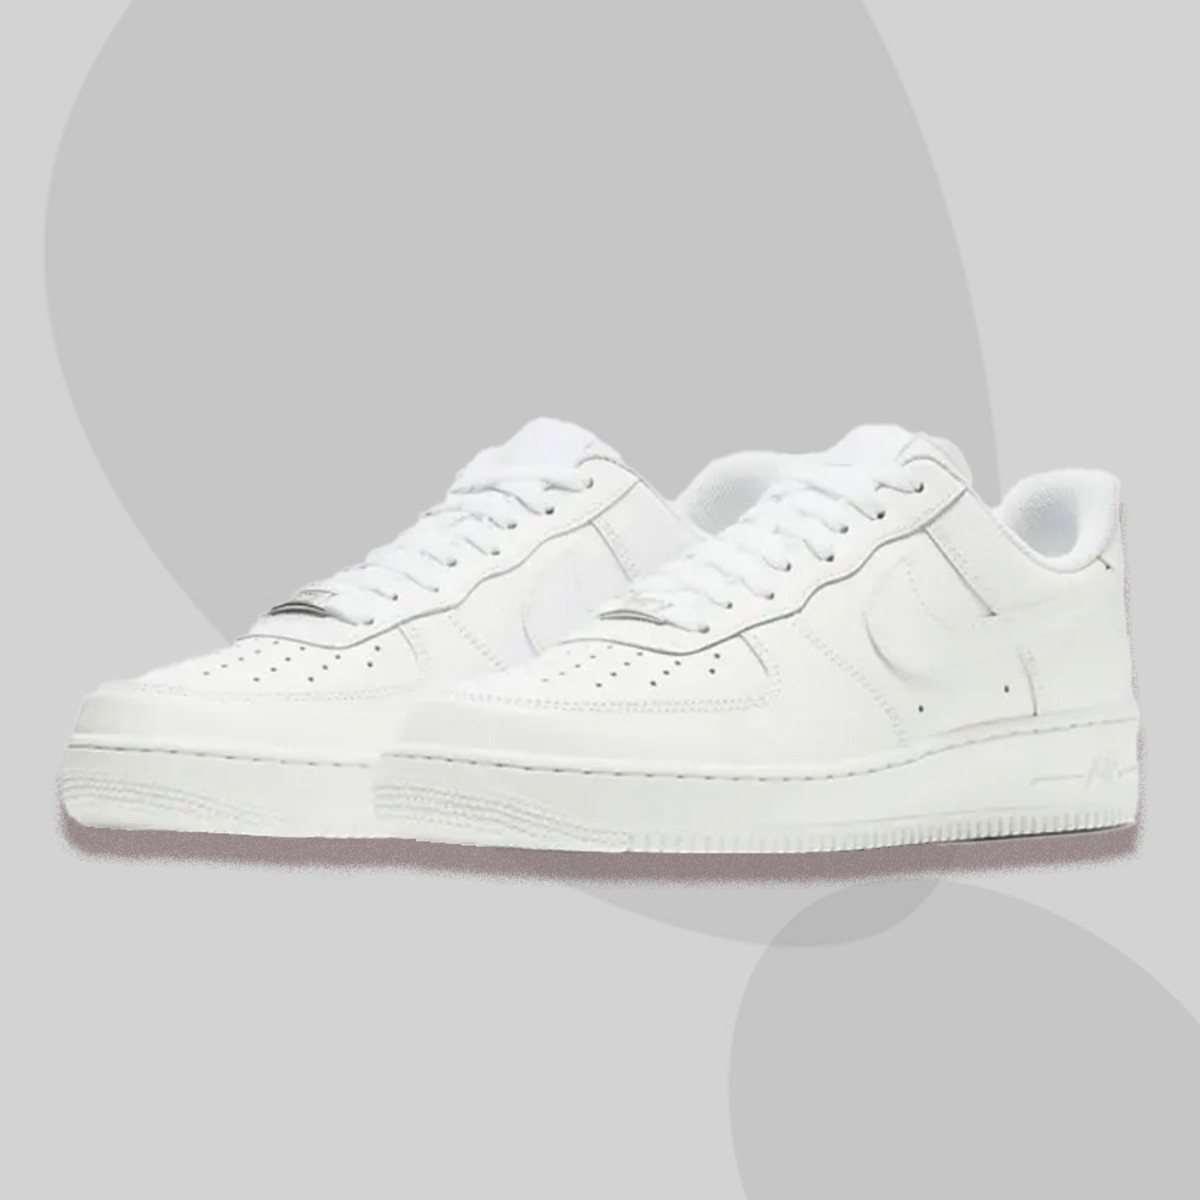 NIKE Air Force 1 Low White with Black Foxing Stripe